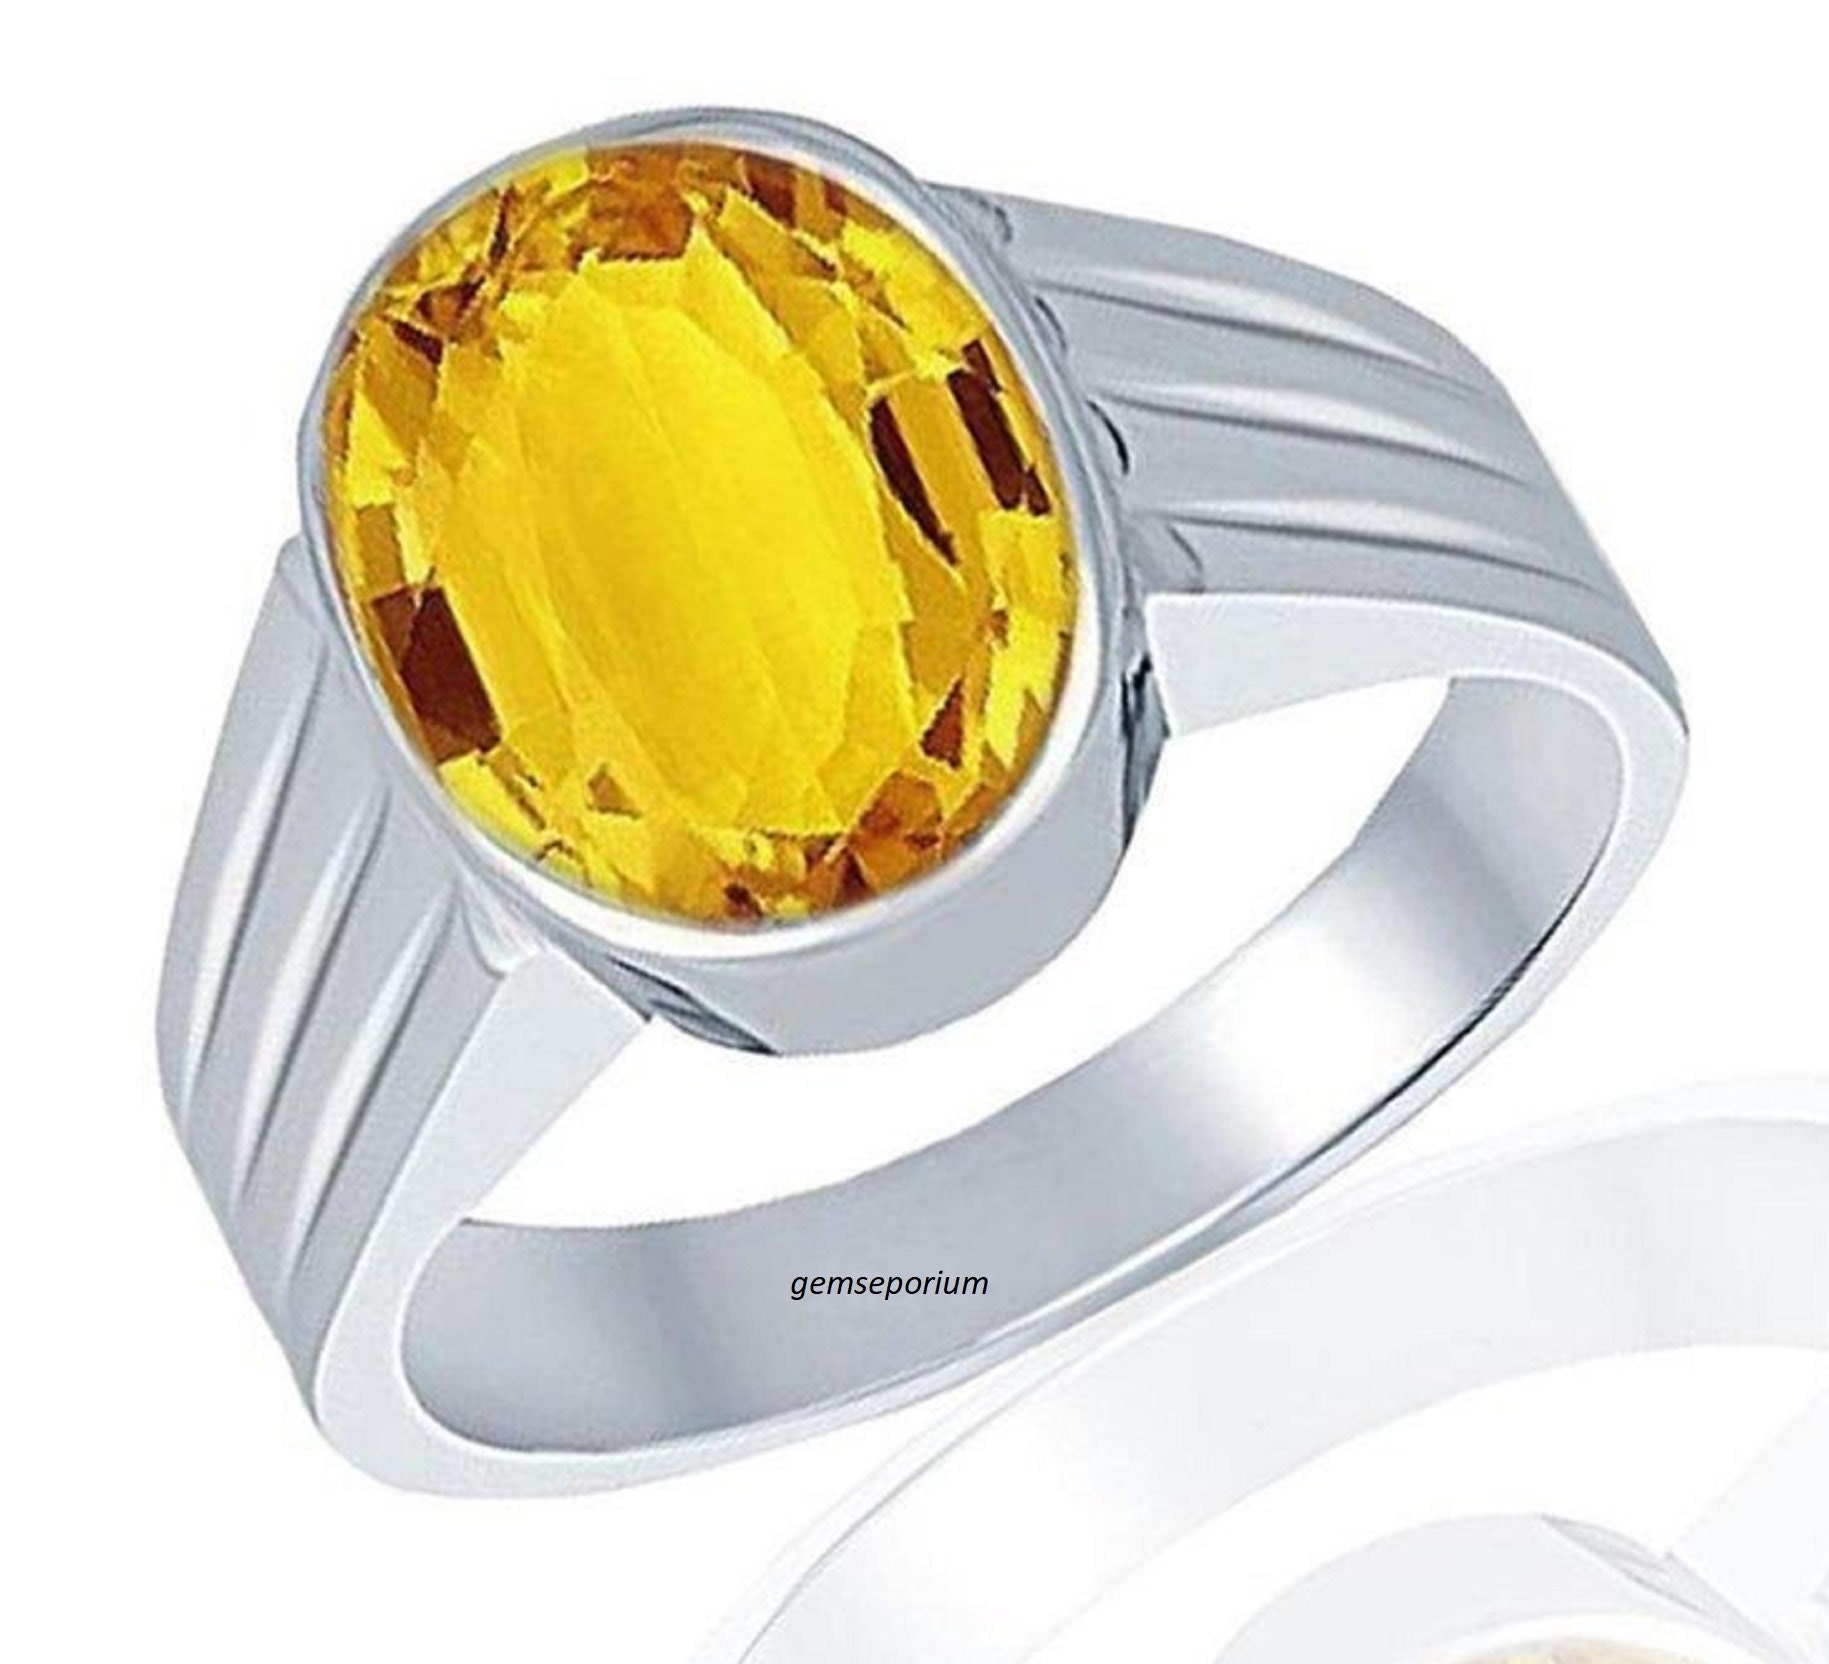 Buy 5 Ct Yellow Sapphire Pukhraj Silver Ring for Men and Women Great Luster  Lemon Color Buttery Yellow Special Discount Online in India - Etsy